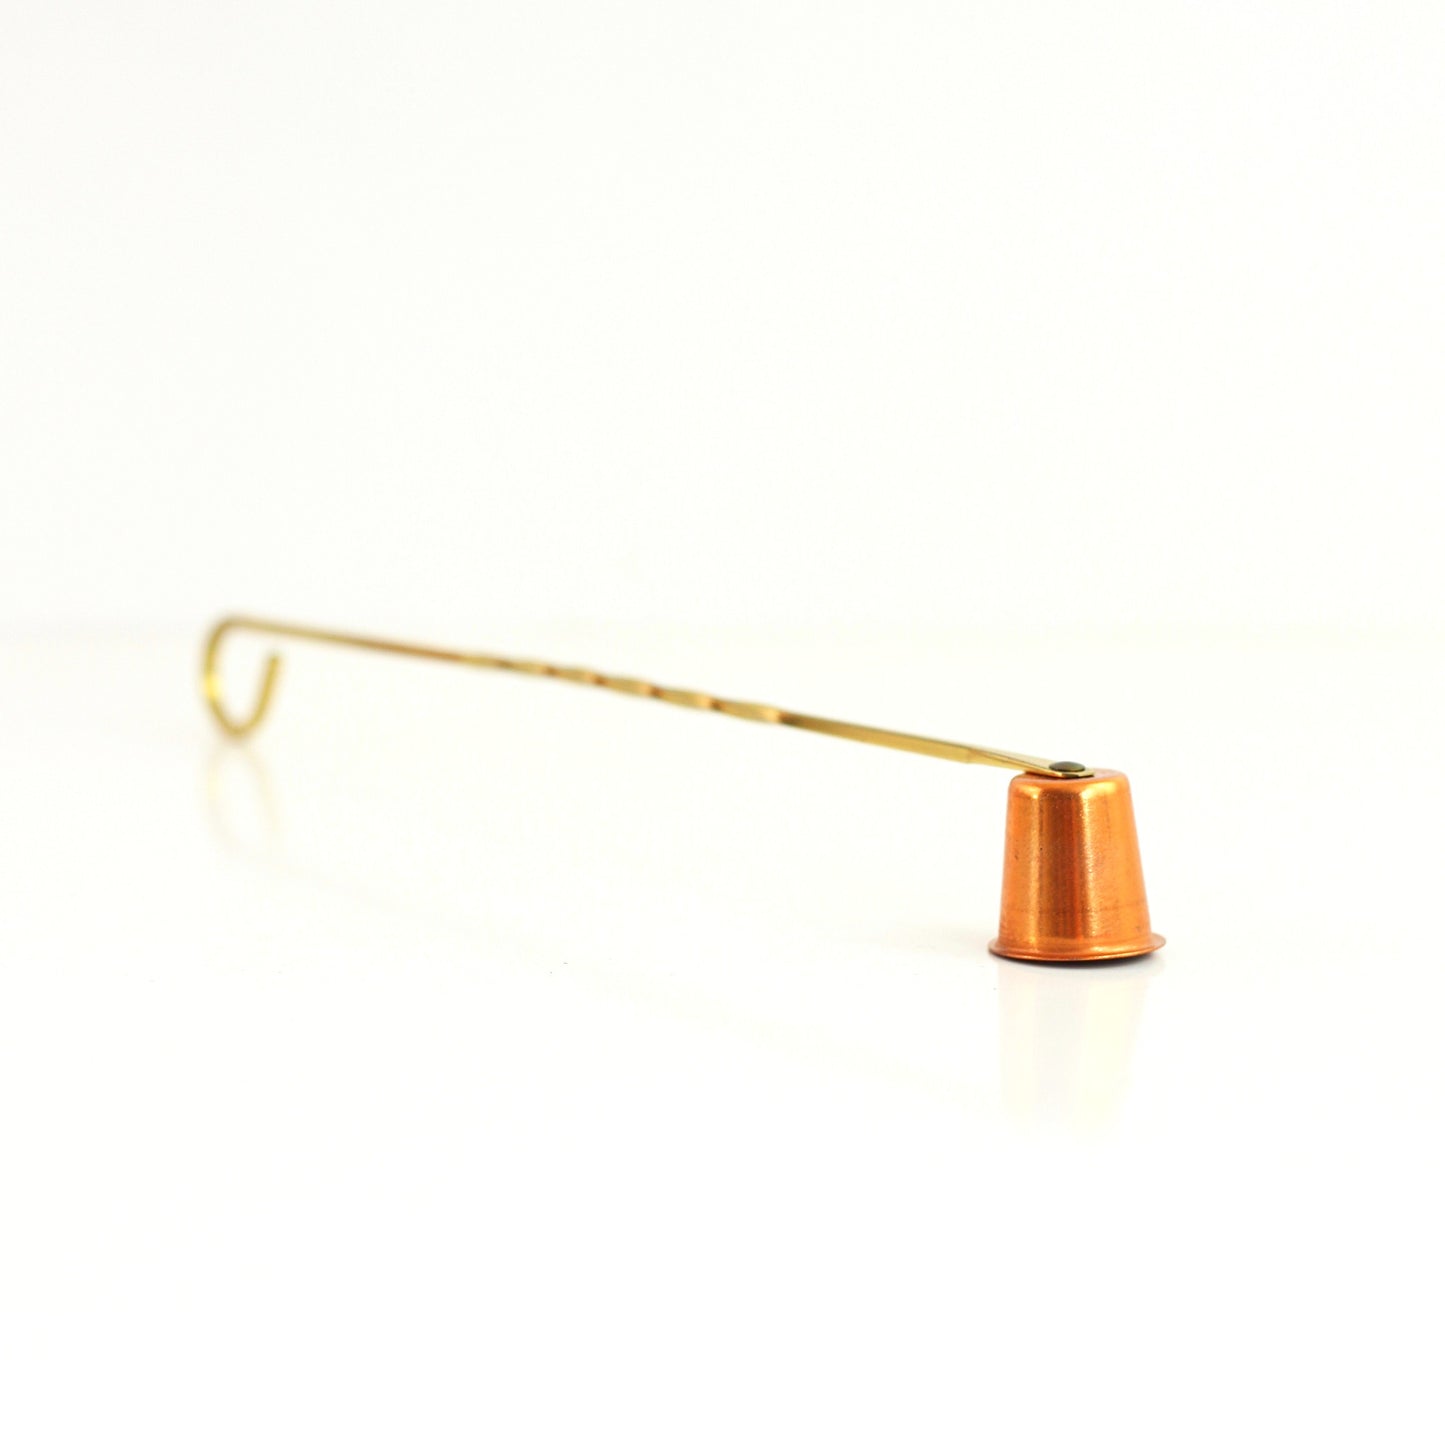 SOLD - Mid Century Copper and Brass Candlestick Set with Snuffer